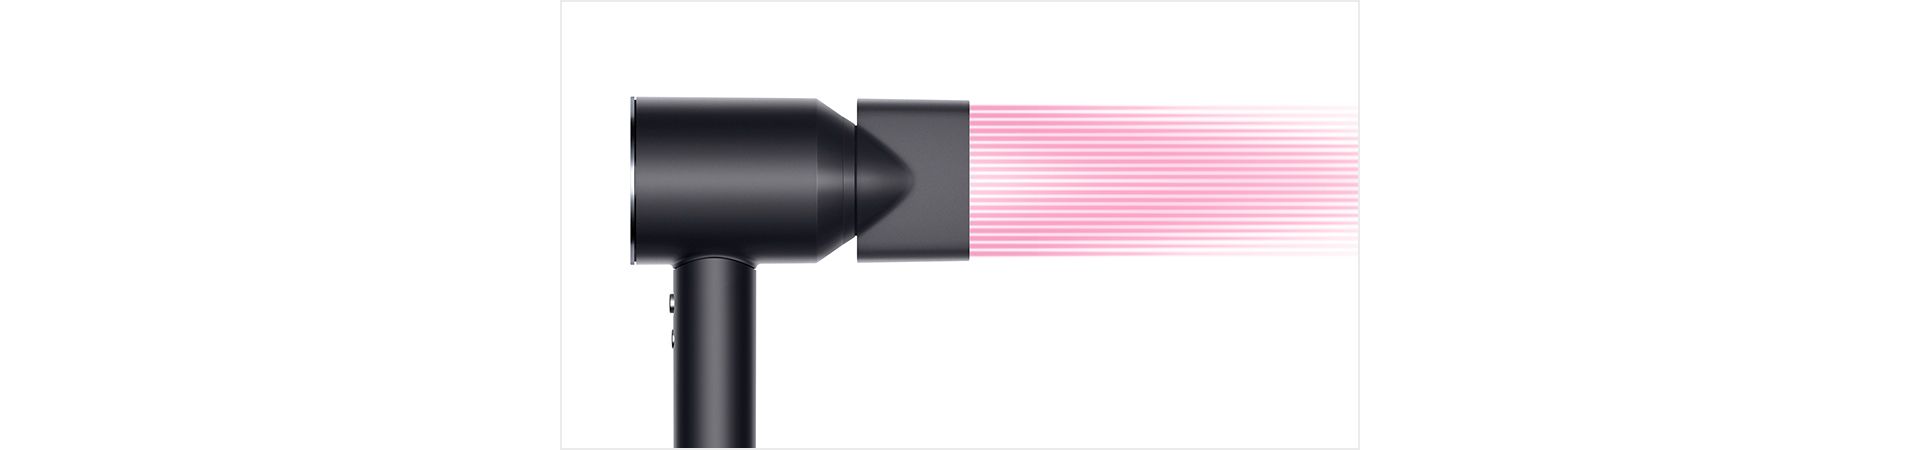 Dyson Supersonic™ hair dryer Black/Nickel with re-engineered Styling concentrator attached